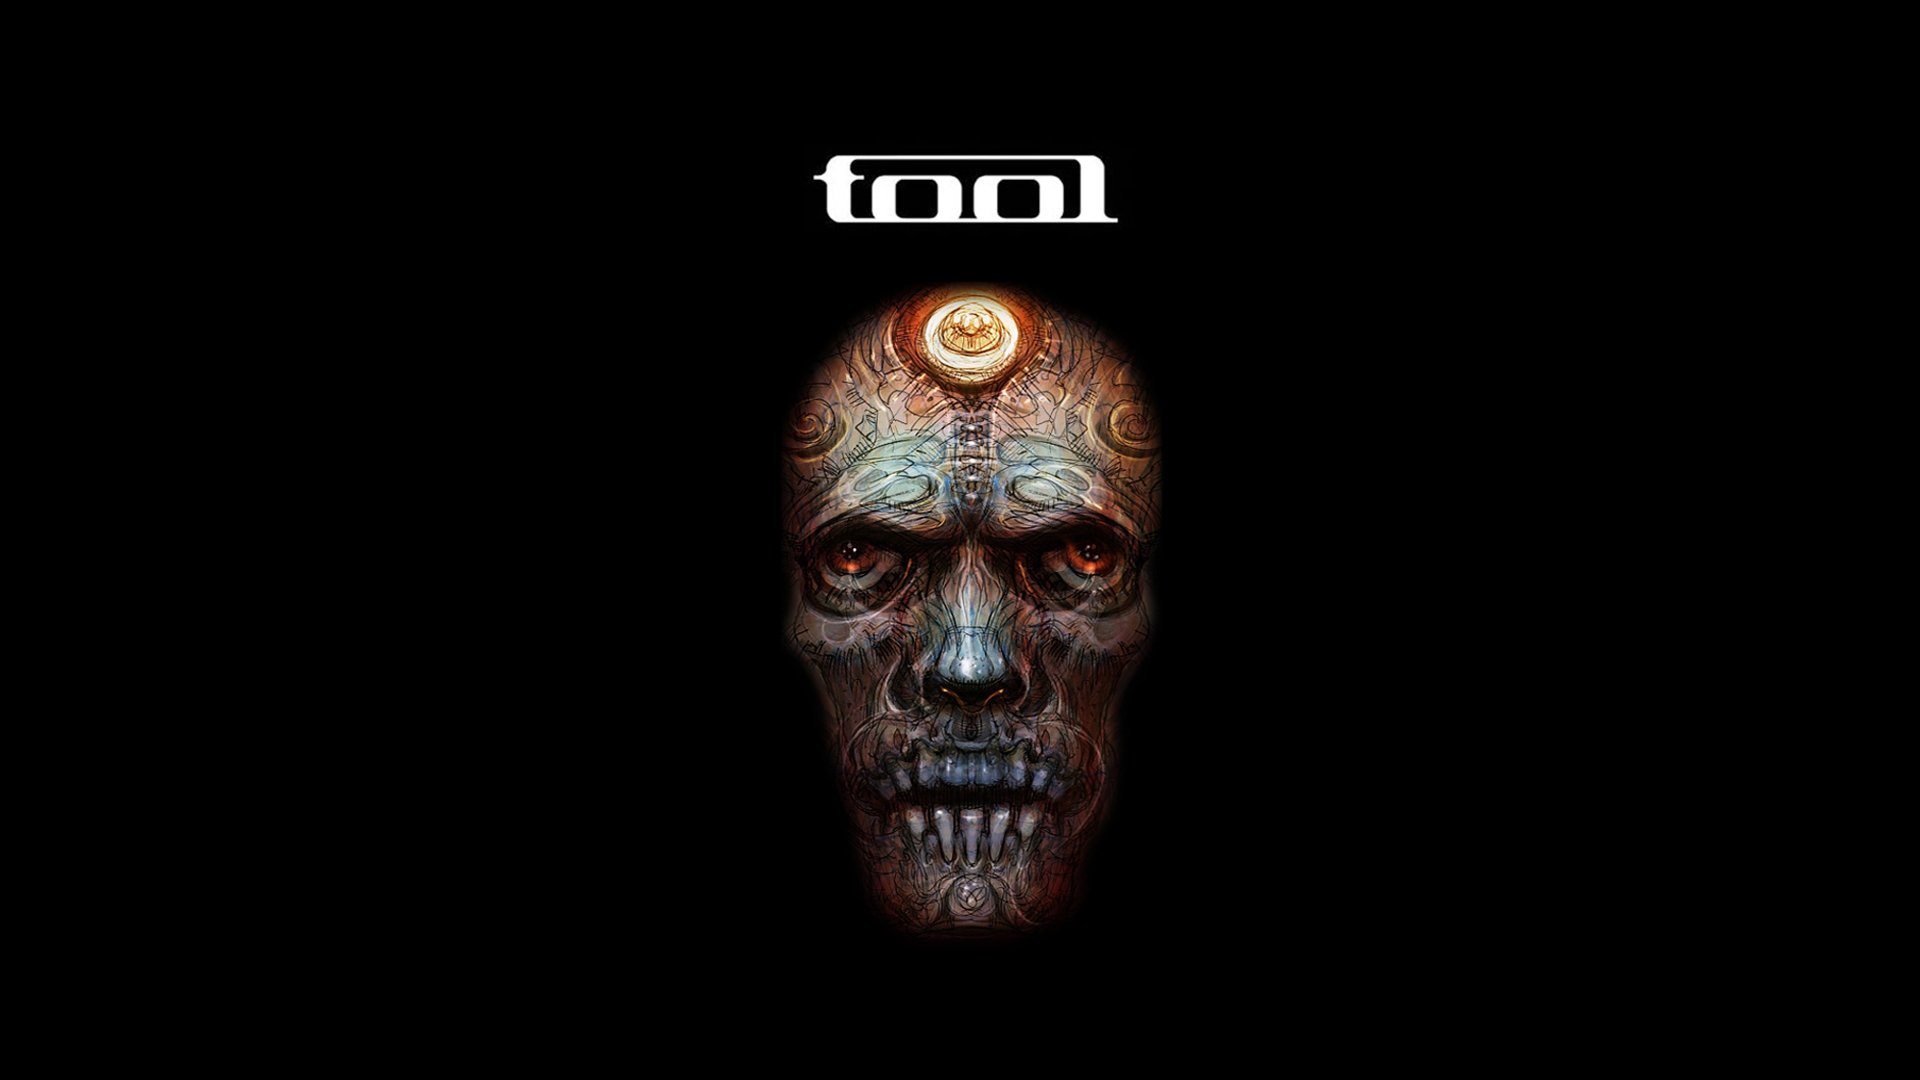 Free Download 30 Tool Hd Wallpapers Background Images 1920x1080 For Your Desktop Mobile